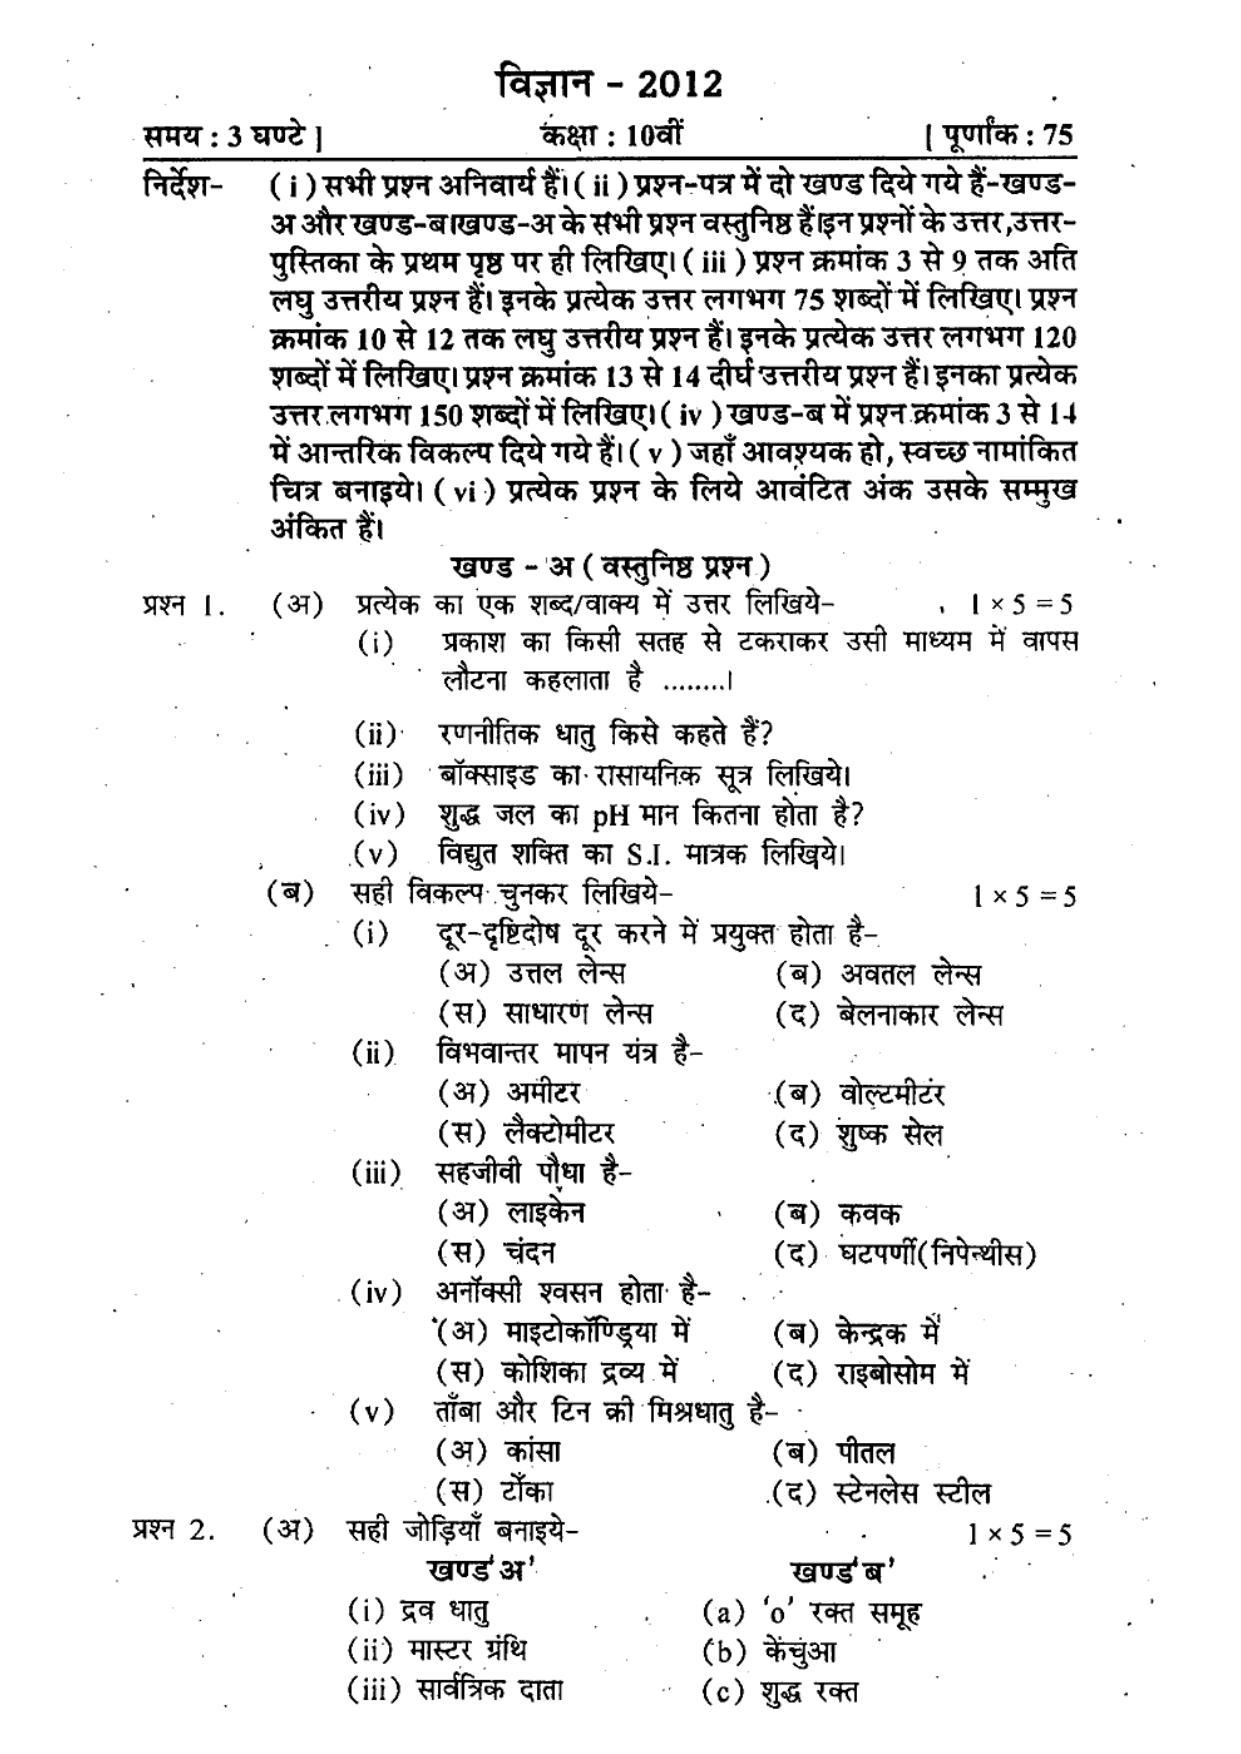 MP Board Class 10 Science (Hindi Medium) 2012 Question Paper - Page 1